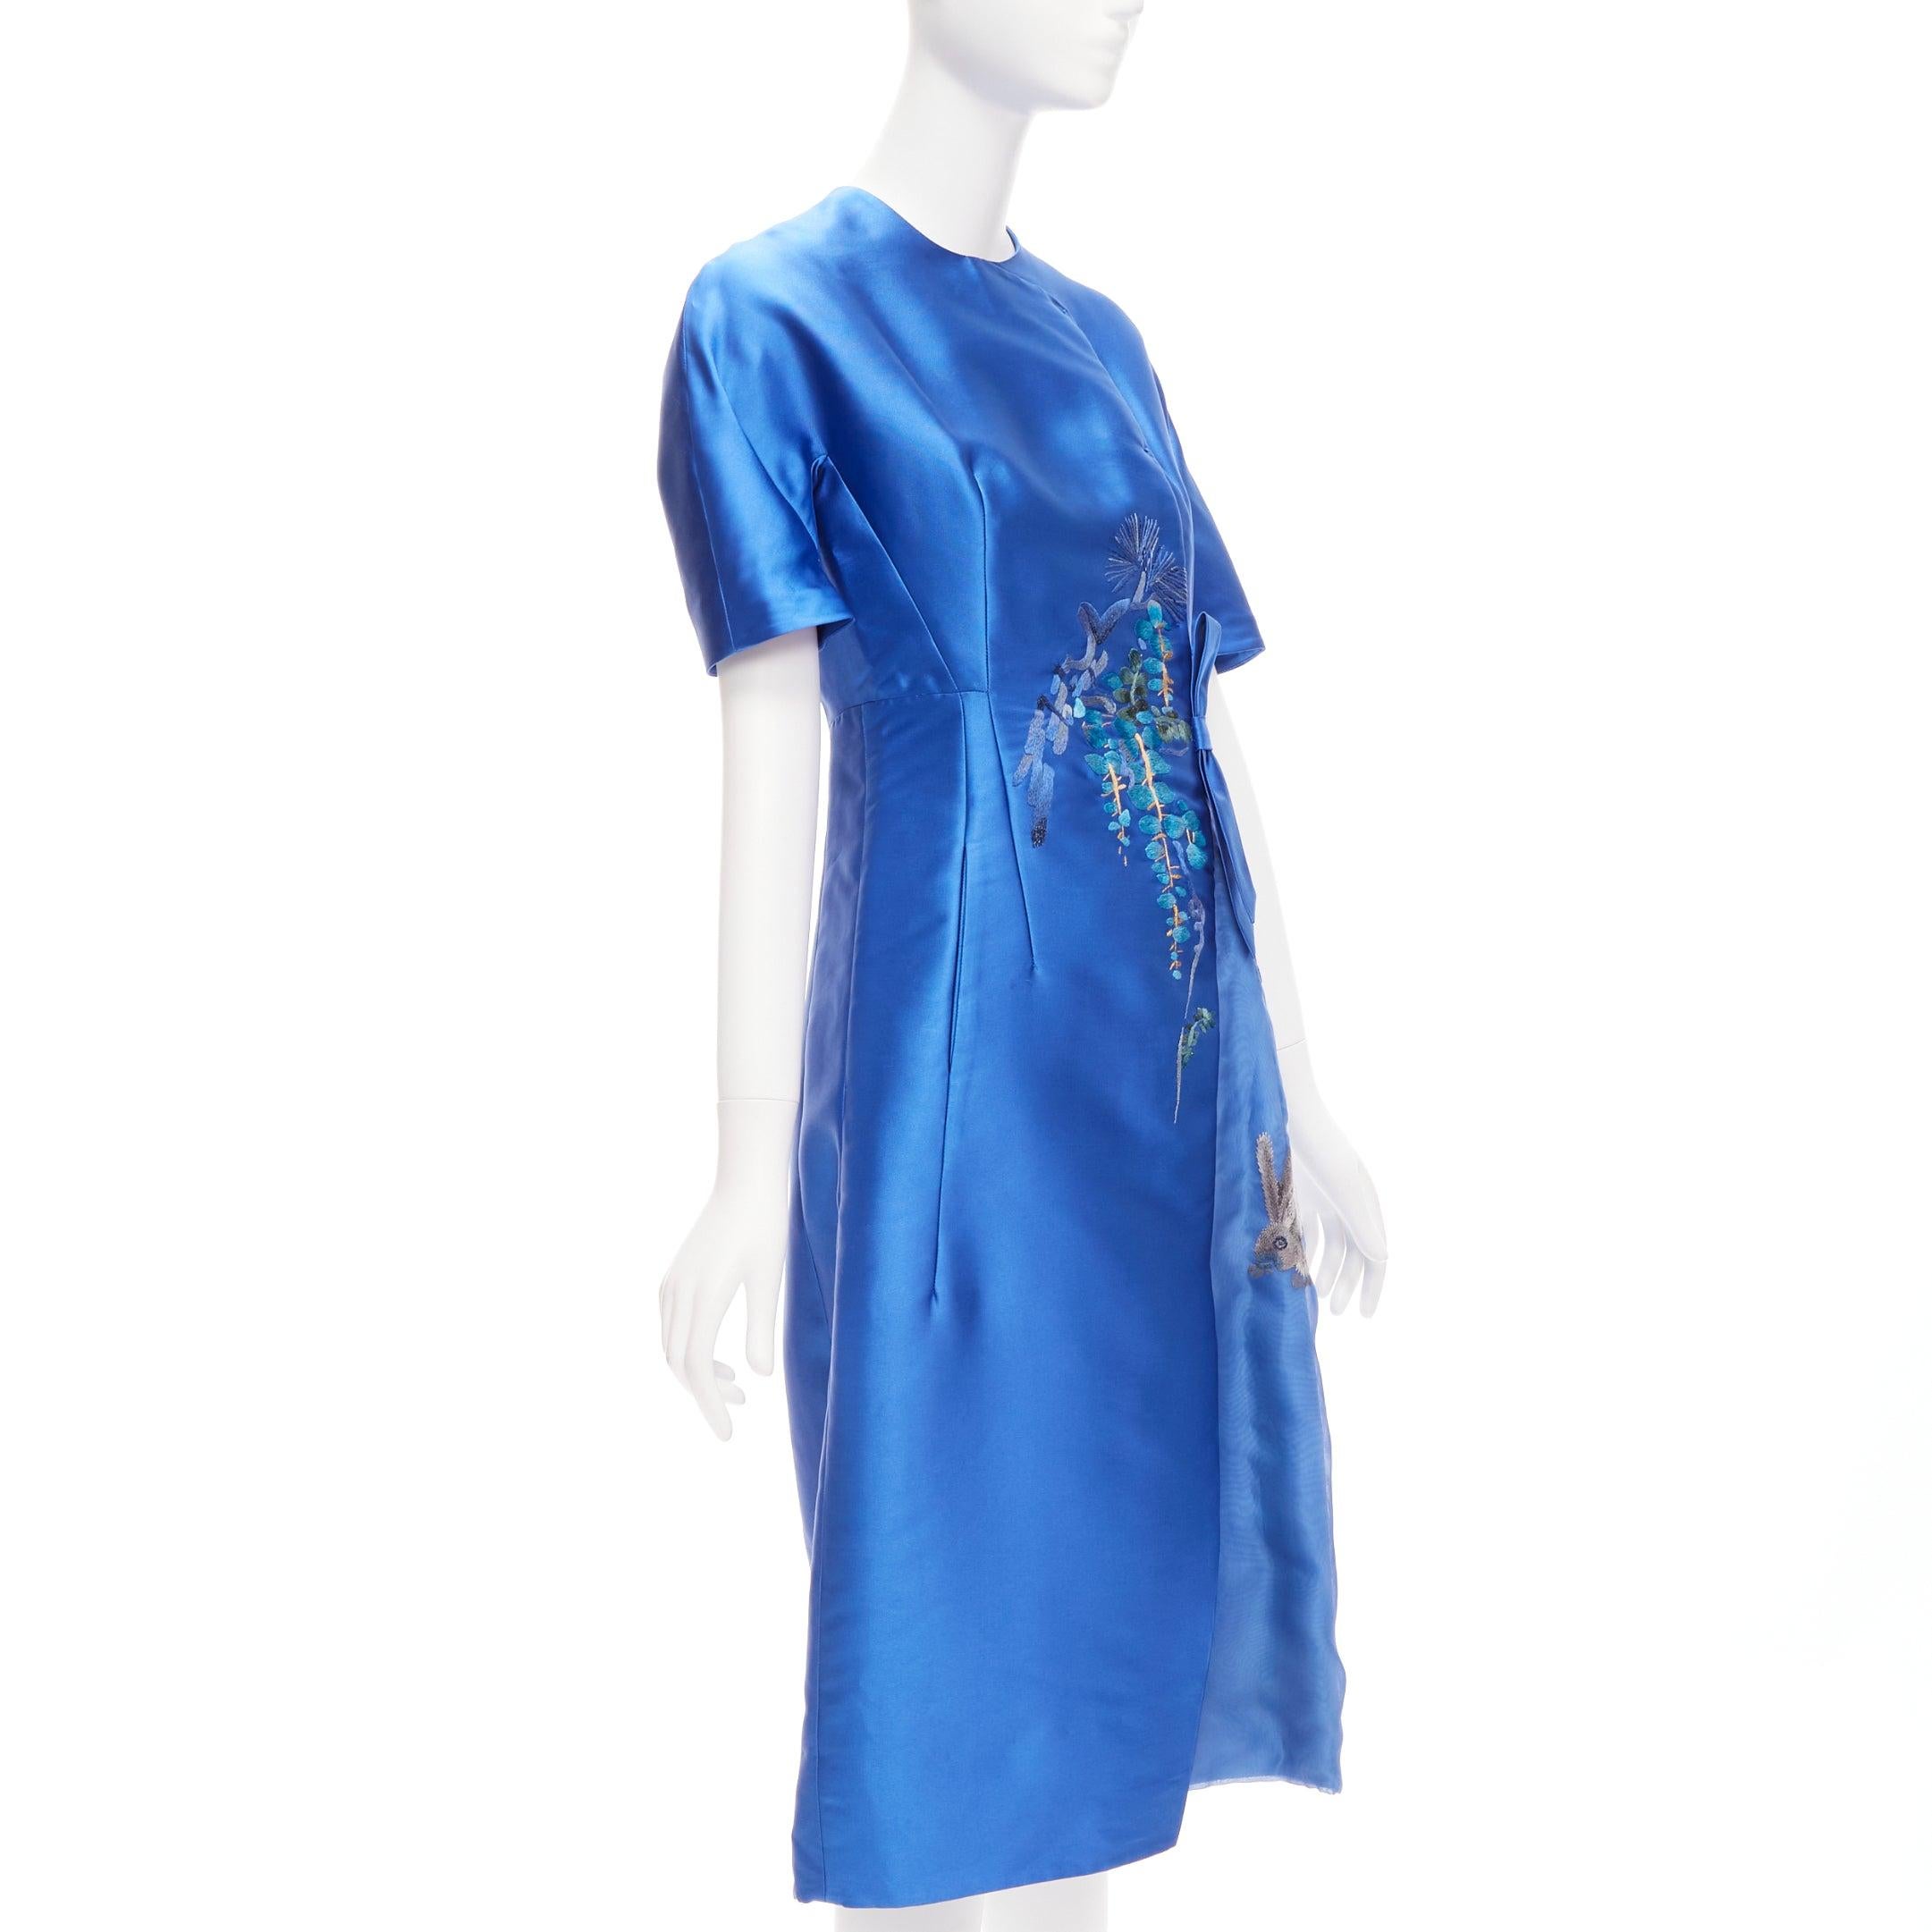 SHIATZY CHEN blue satin floral oriental embroidery bow dress IT40 S
Reference: CELG/A00291
Brand: Shiatzy Chen
Material: Polyester, Silk
Color: Blue, Multicolour
Pattern: Floral
Closure: Zip
Lining: Blue Fabric
Extra Details: Back zip. Darts at